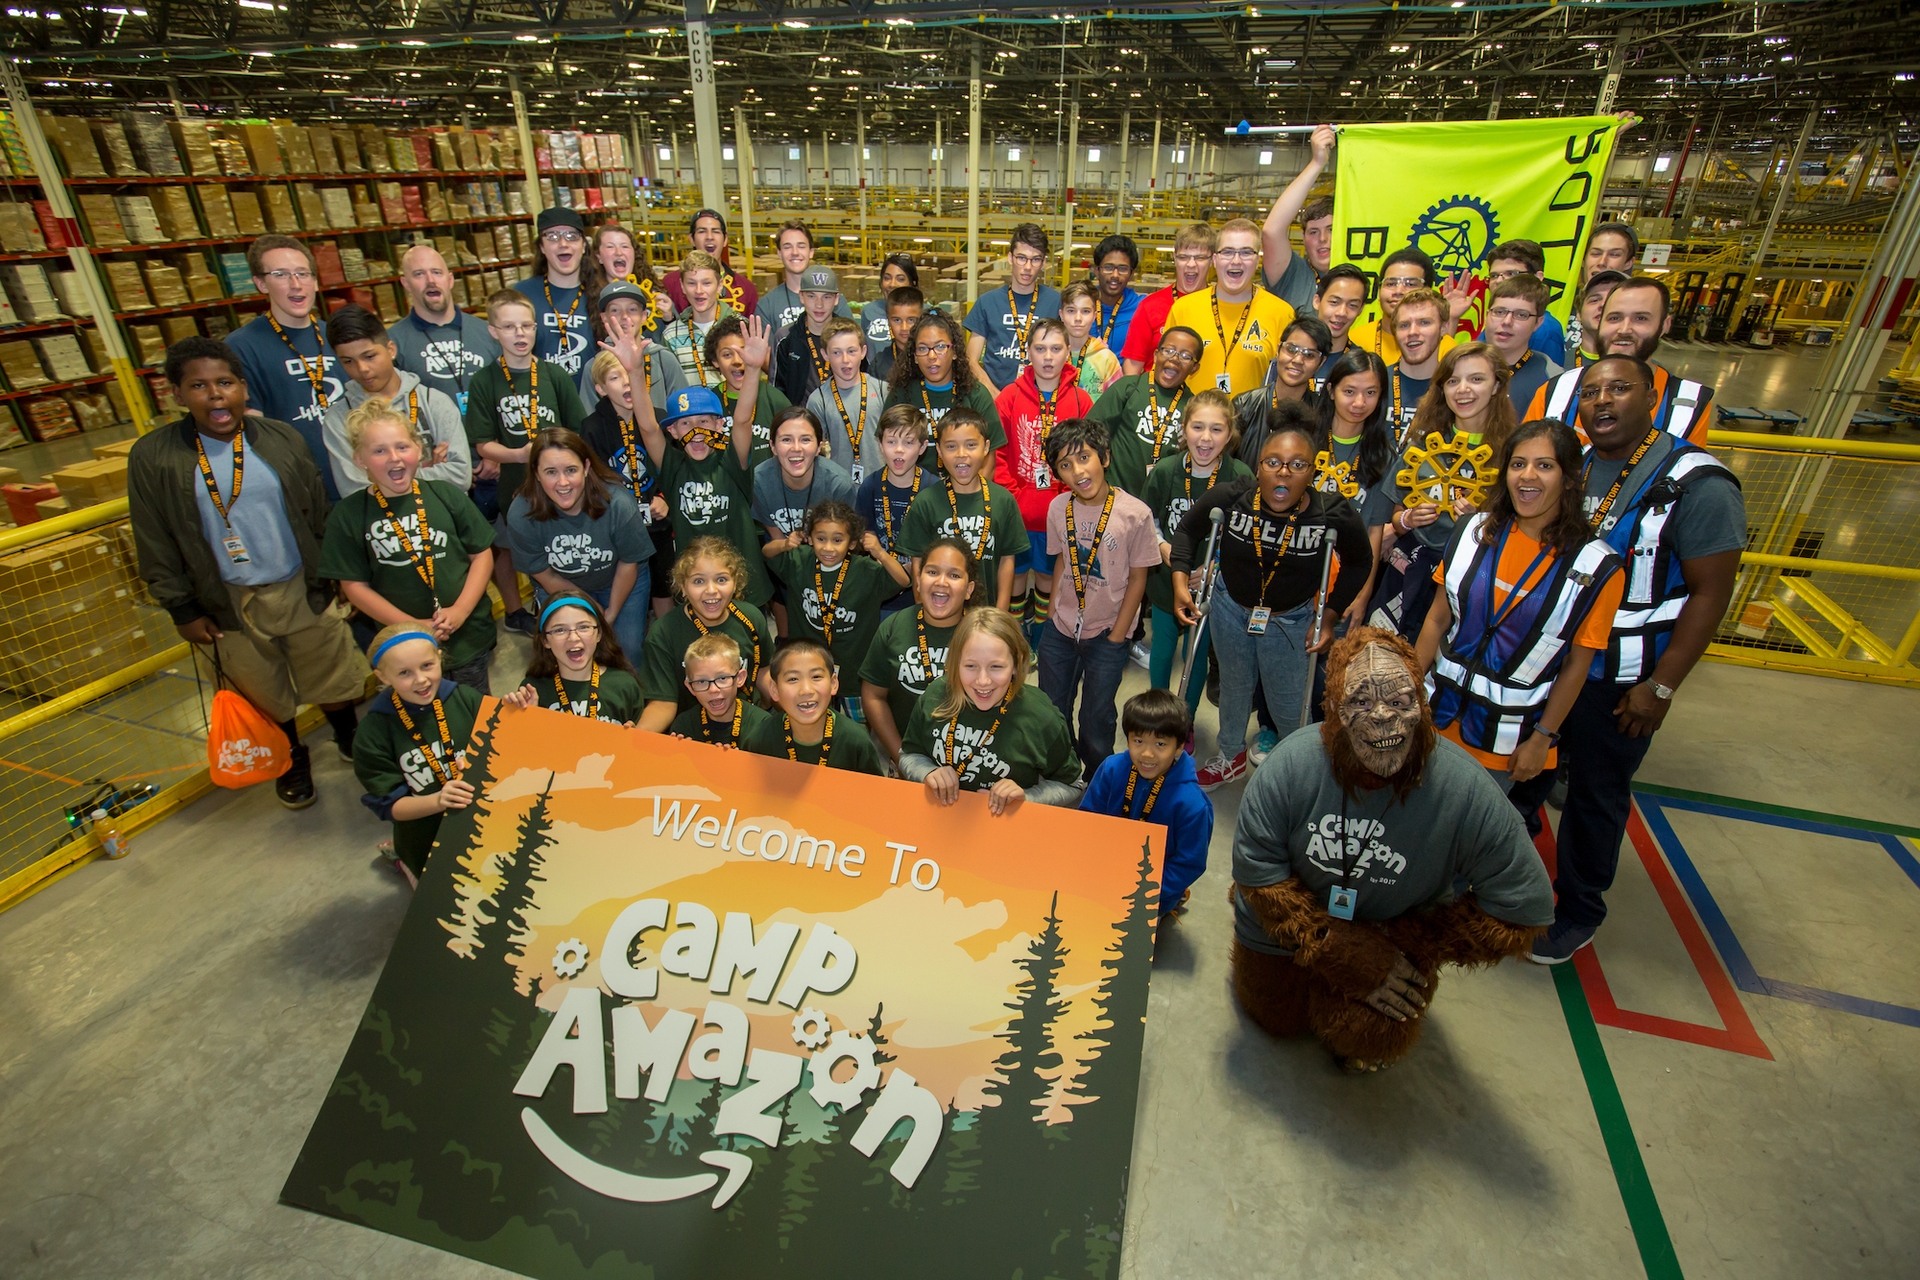 Students participate in a Camp Amazon event at a fulfillment center in Washington